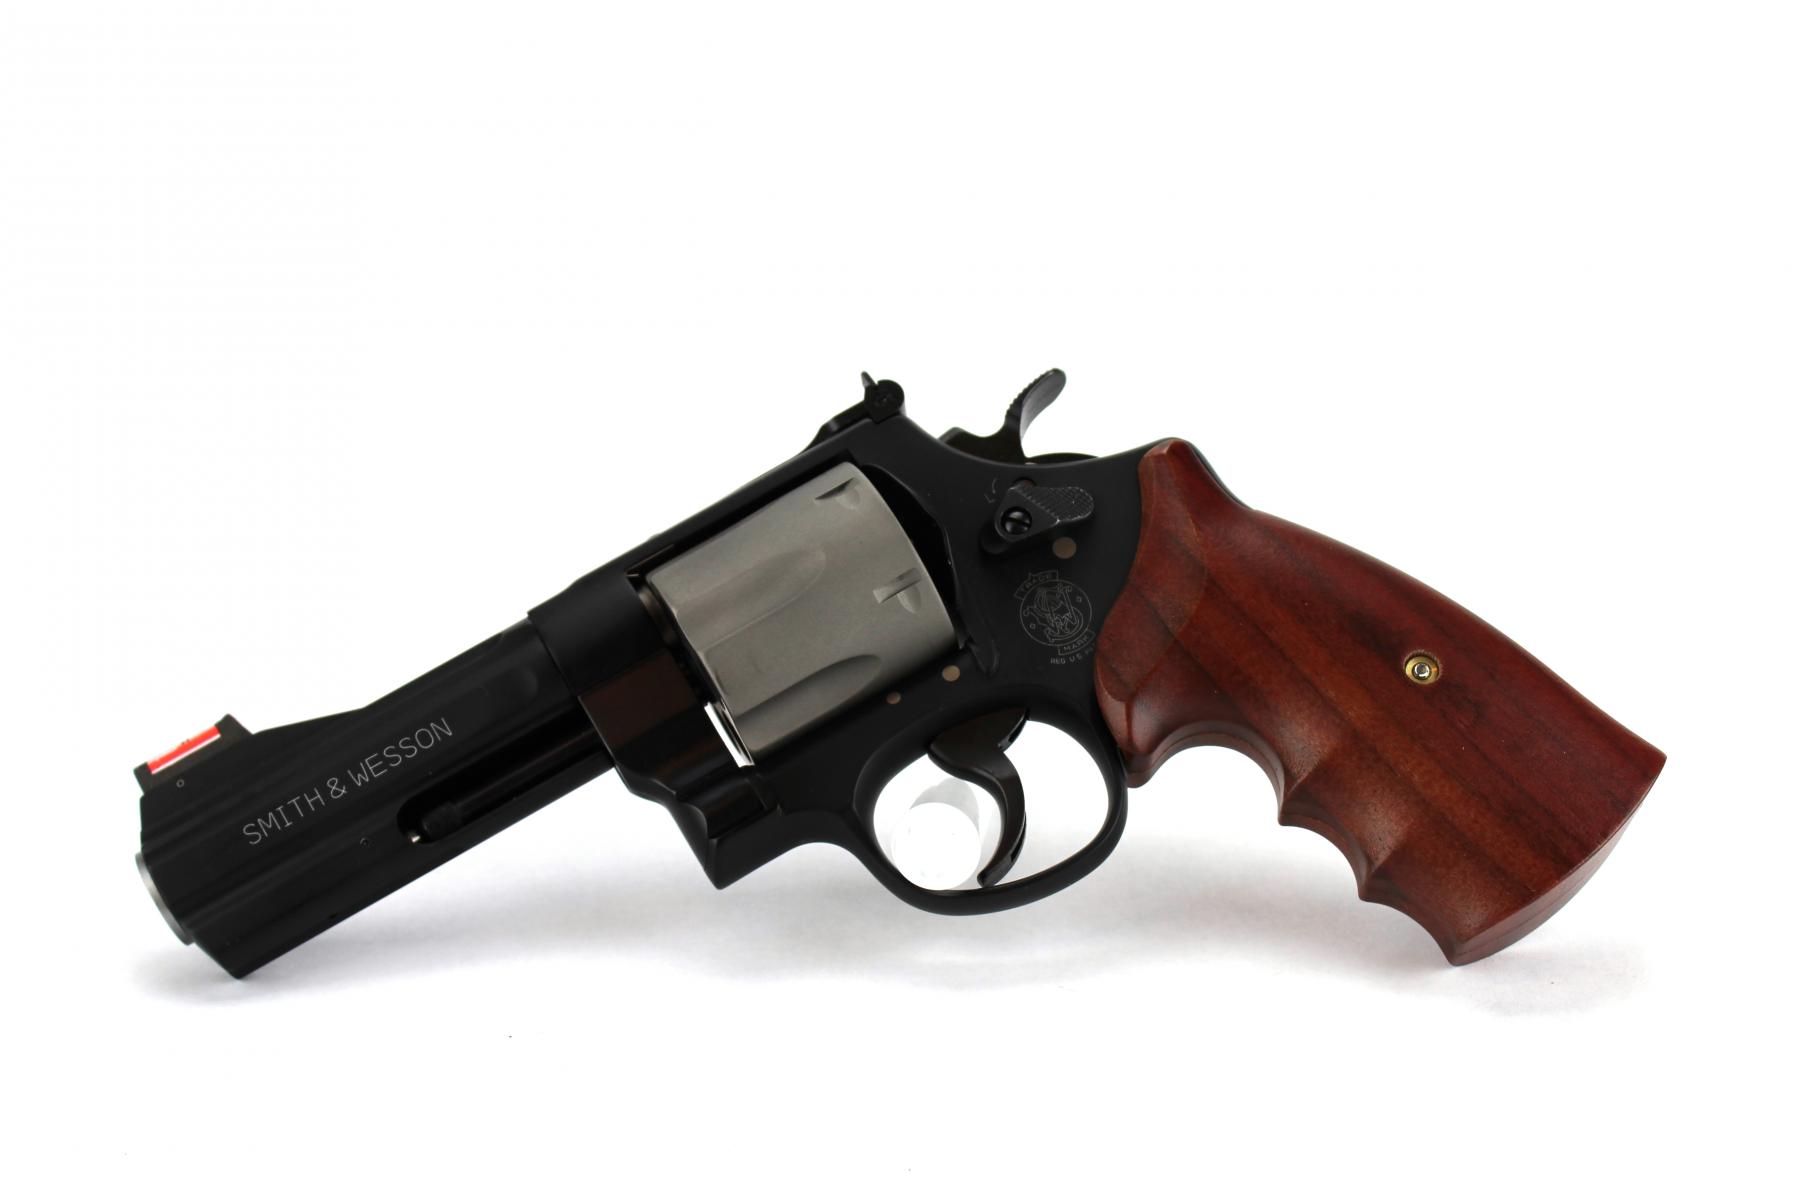 Smith & Wesson S&W Model 329PD AirLite Sc 44 MAG 163414 